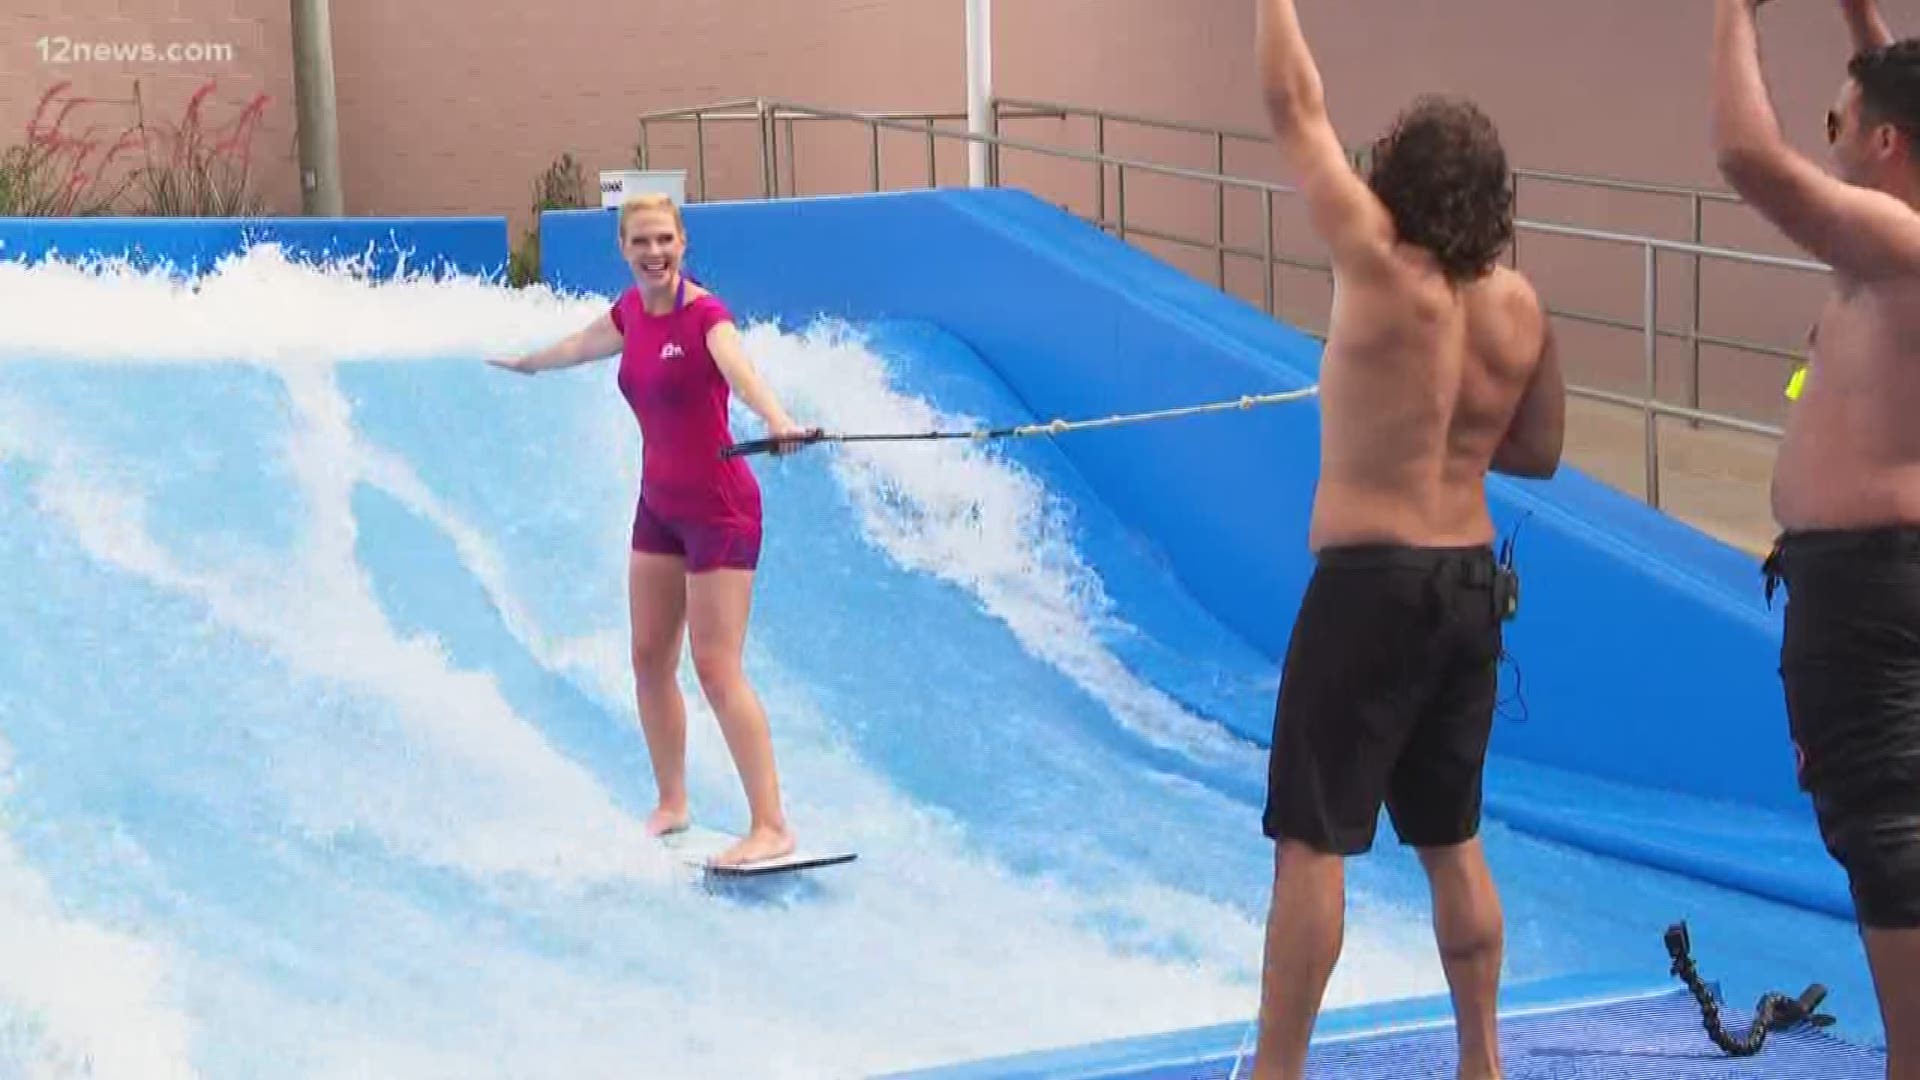 You can channel your inner surfer right here in the middle of the desert. You too can learn to ride waves on a flow-rider in Mesa.